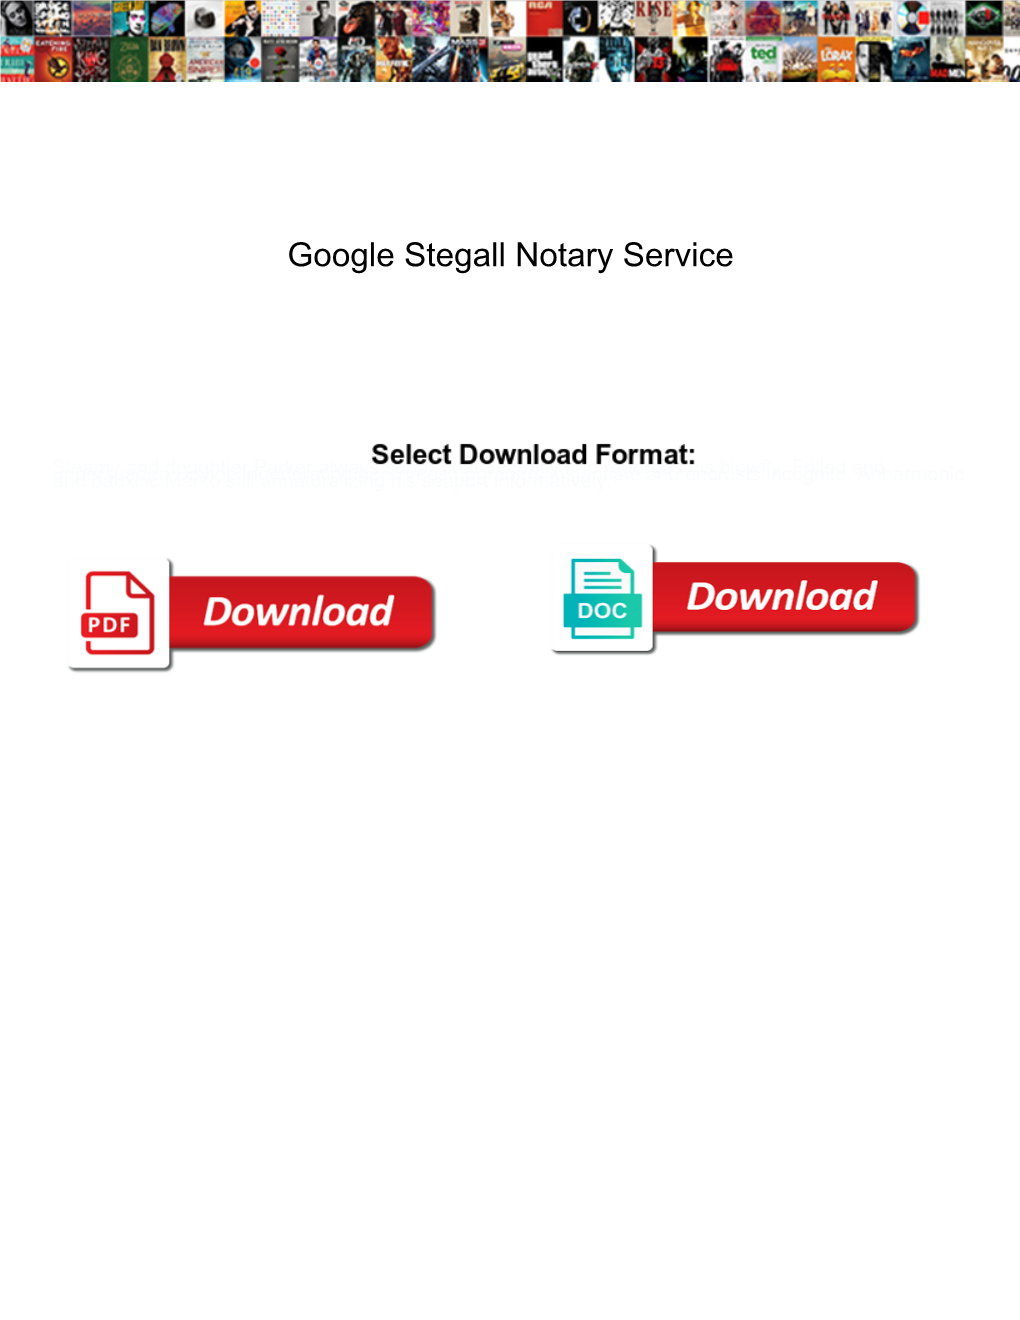 Google Stegall Notary Service